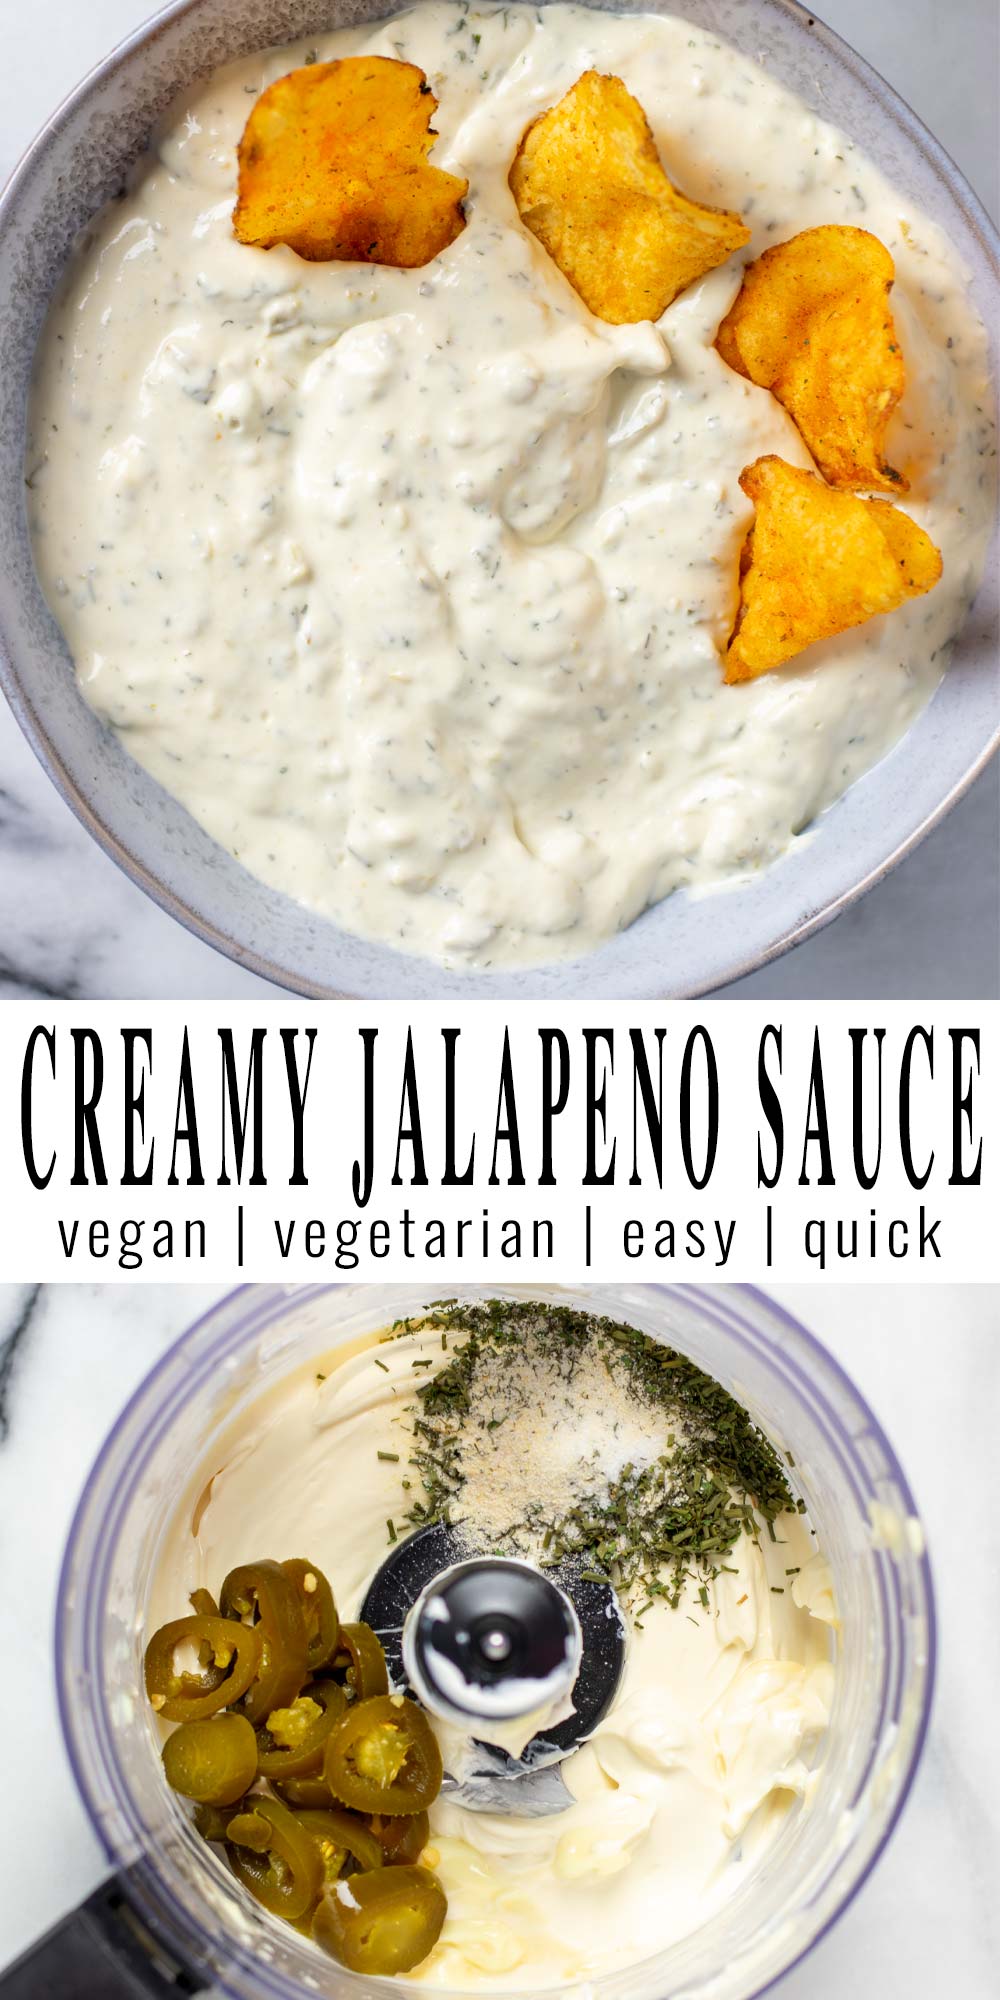 Collage of two pictures of the Creamy Jalapeño Sauce with recipe title text.